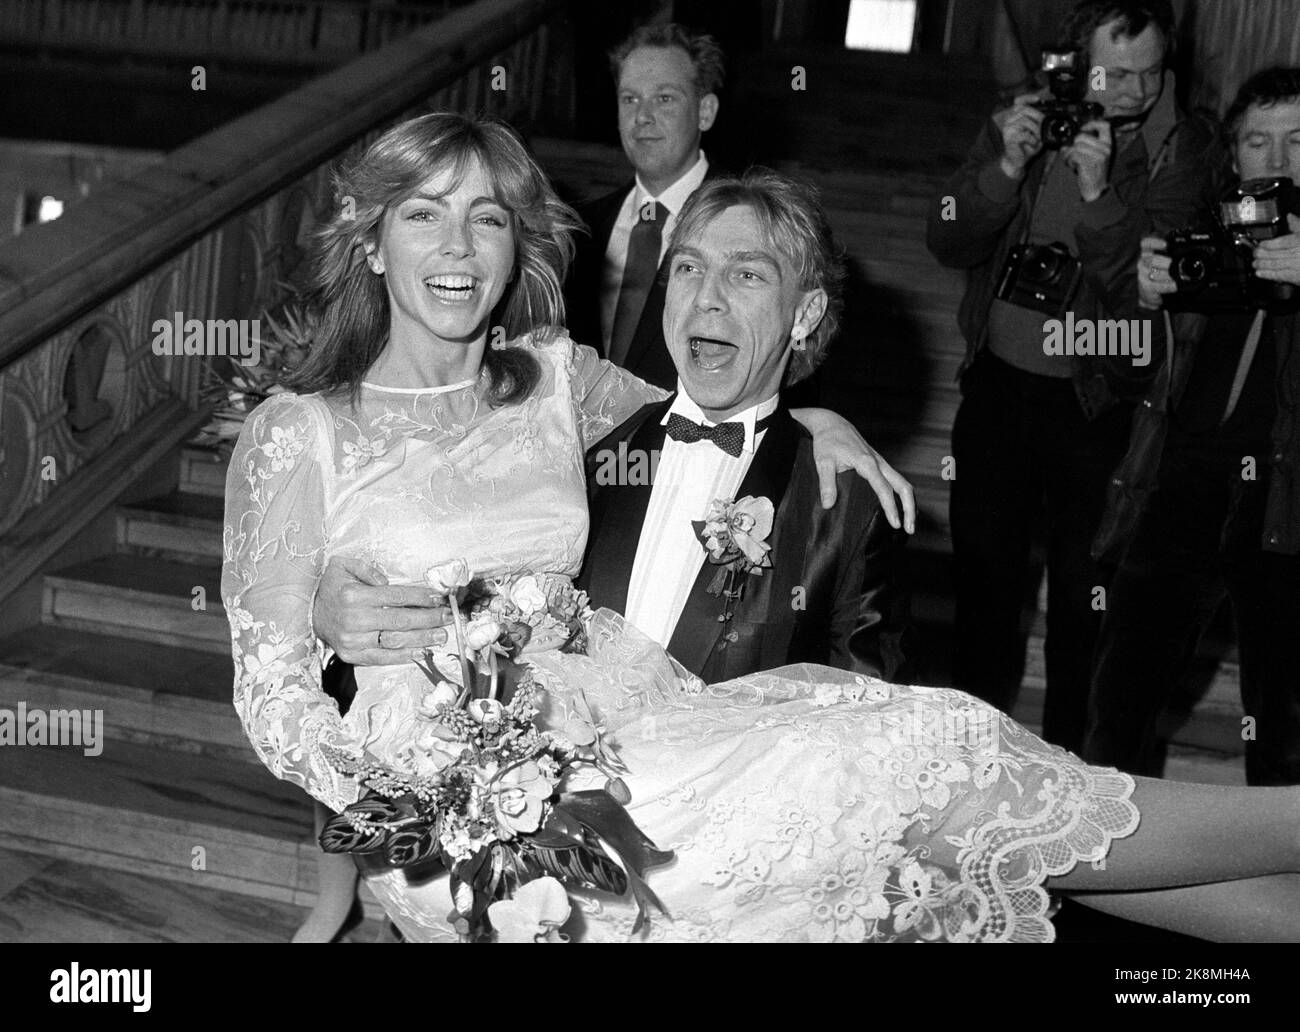 198006 hi-res stock photography and images - Alamy